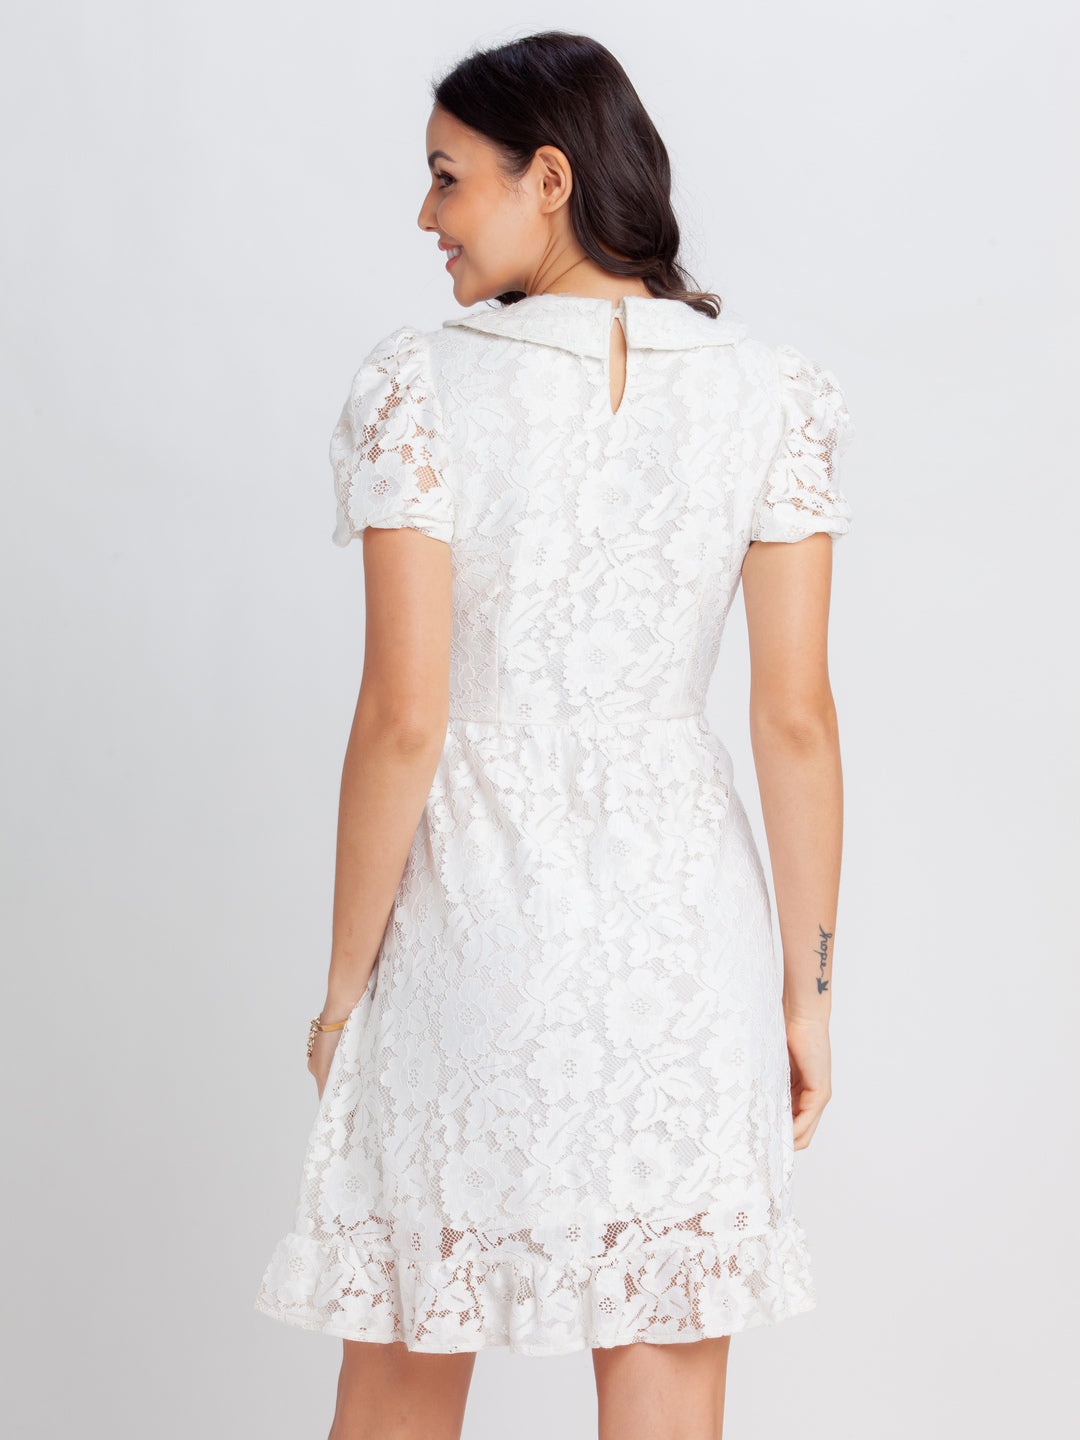 Off White Lace Short Dress For Women